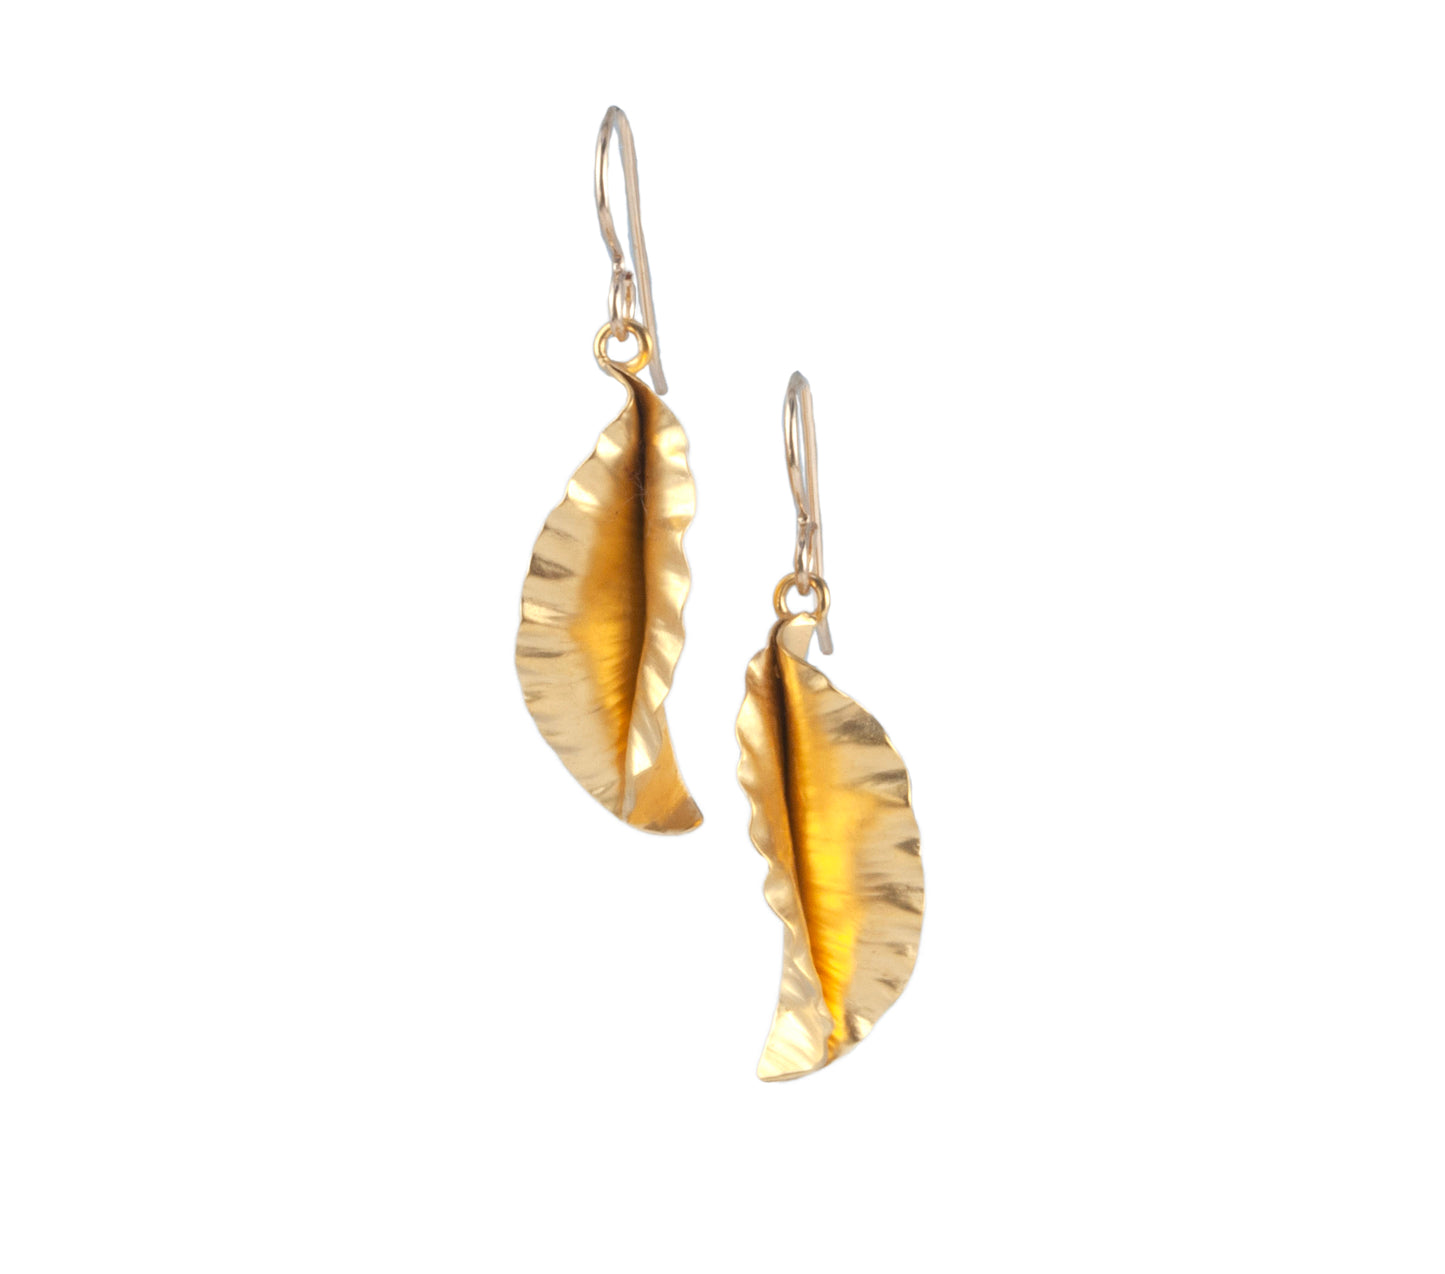 Vitrice McMurry Hammered Leaf Earrings (Large)